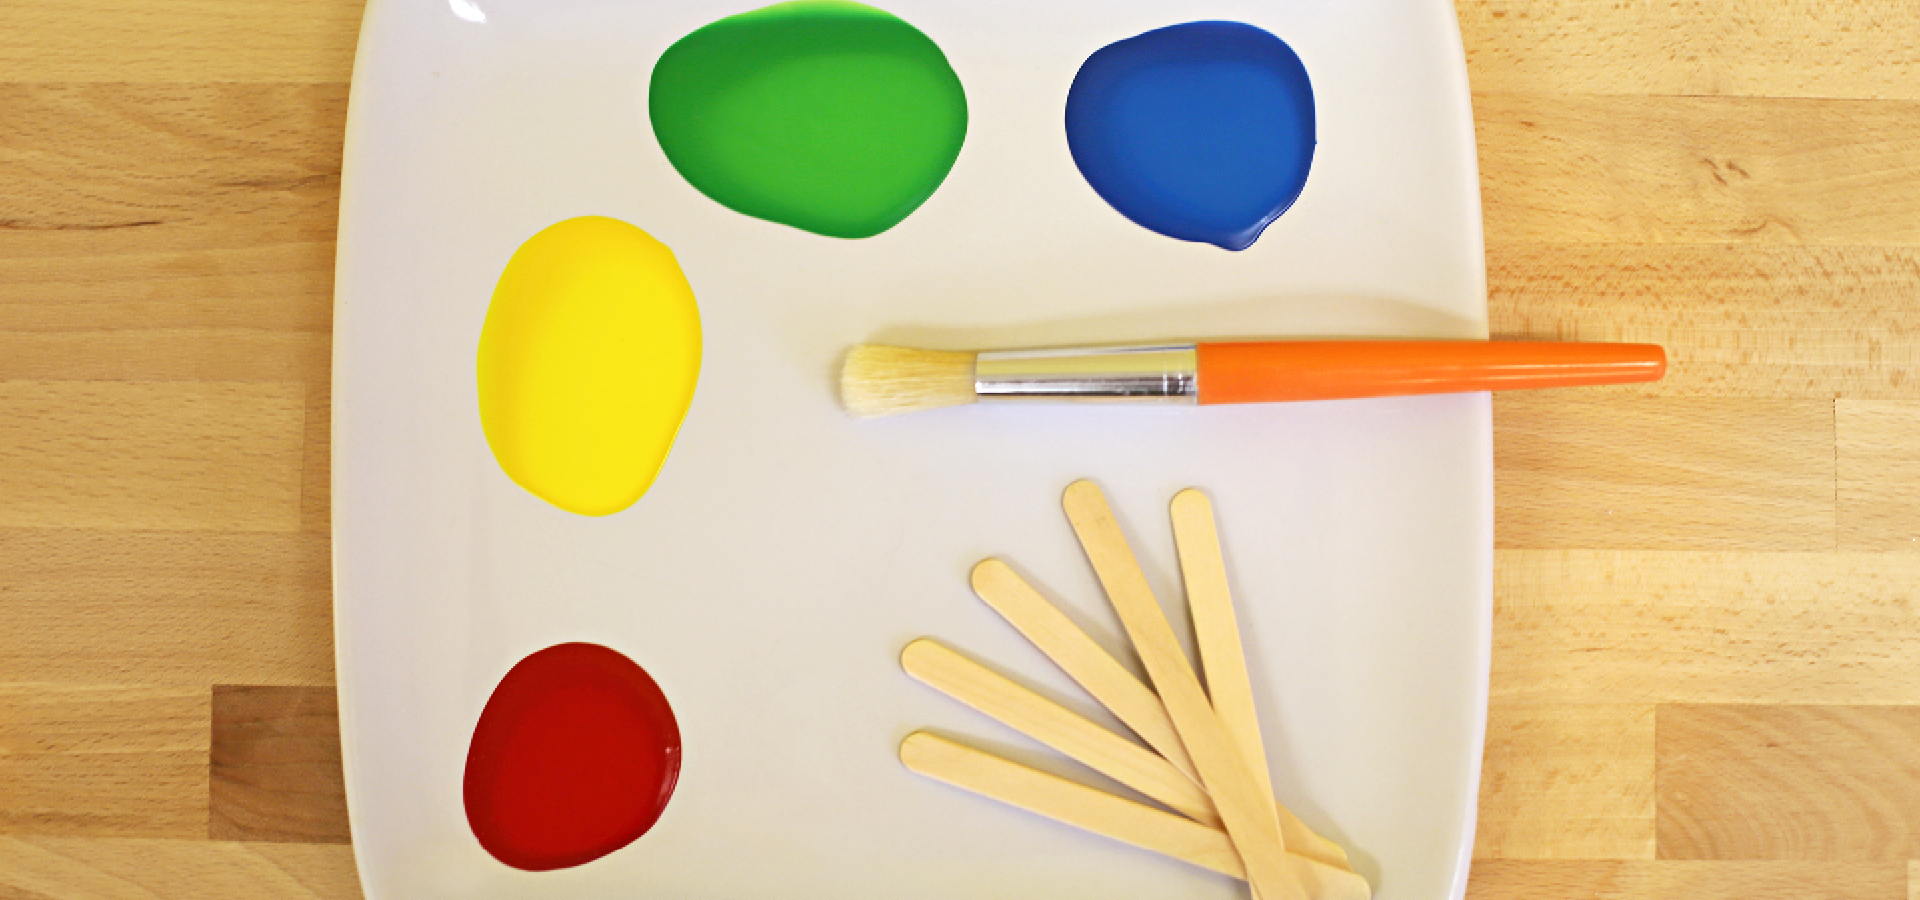 White paint tray with multicolored paints, a paintbrush, and ice pop sticks